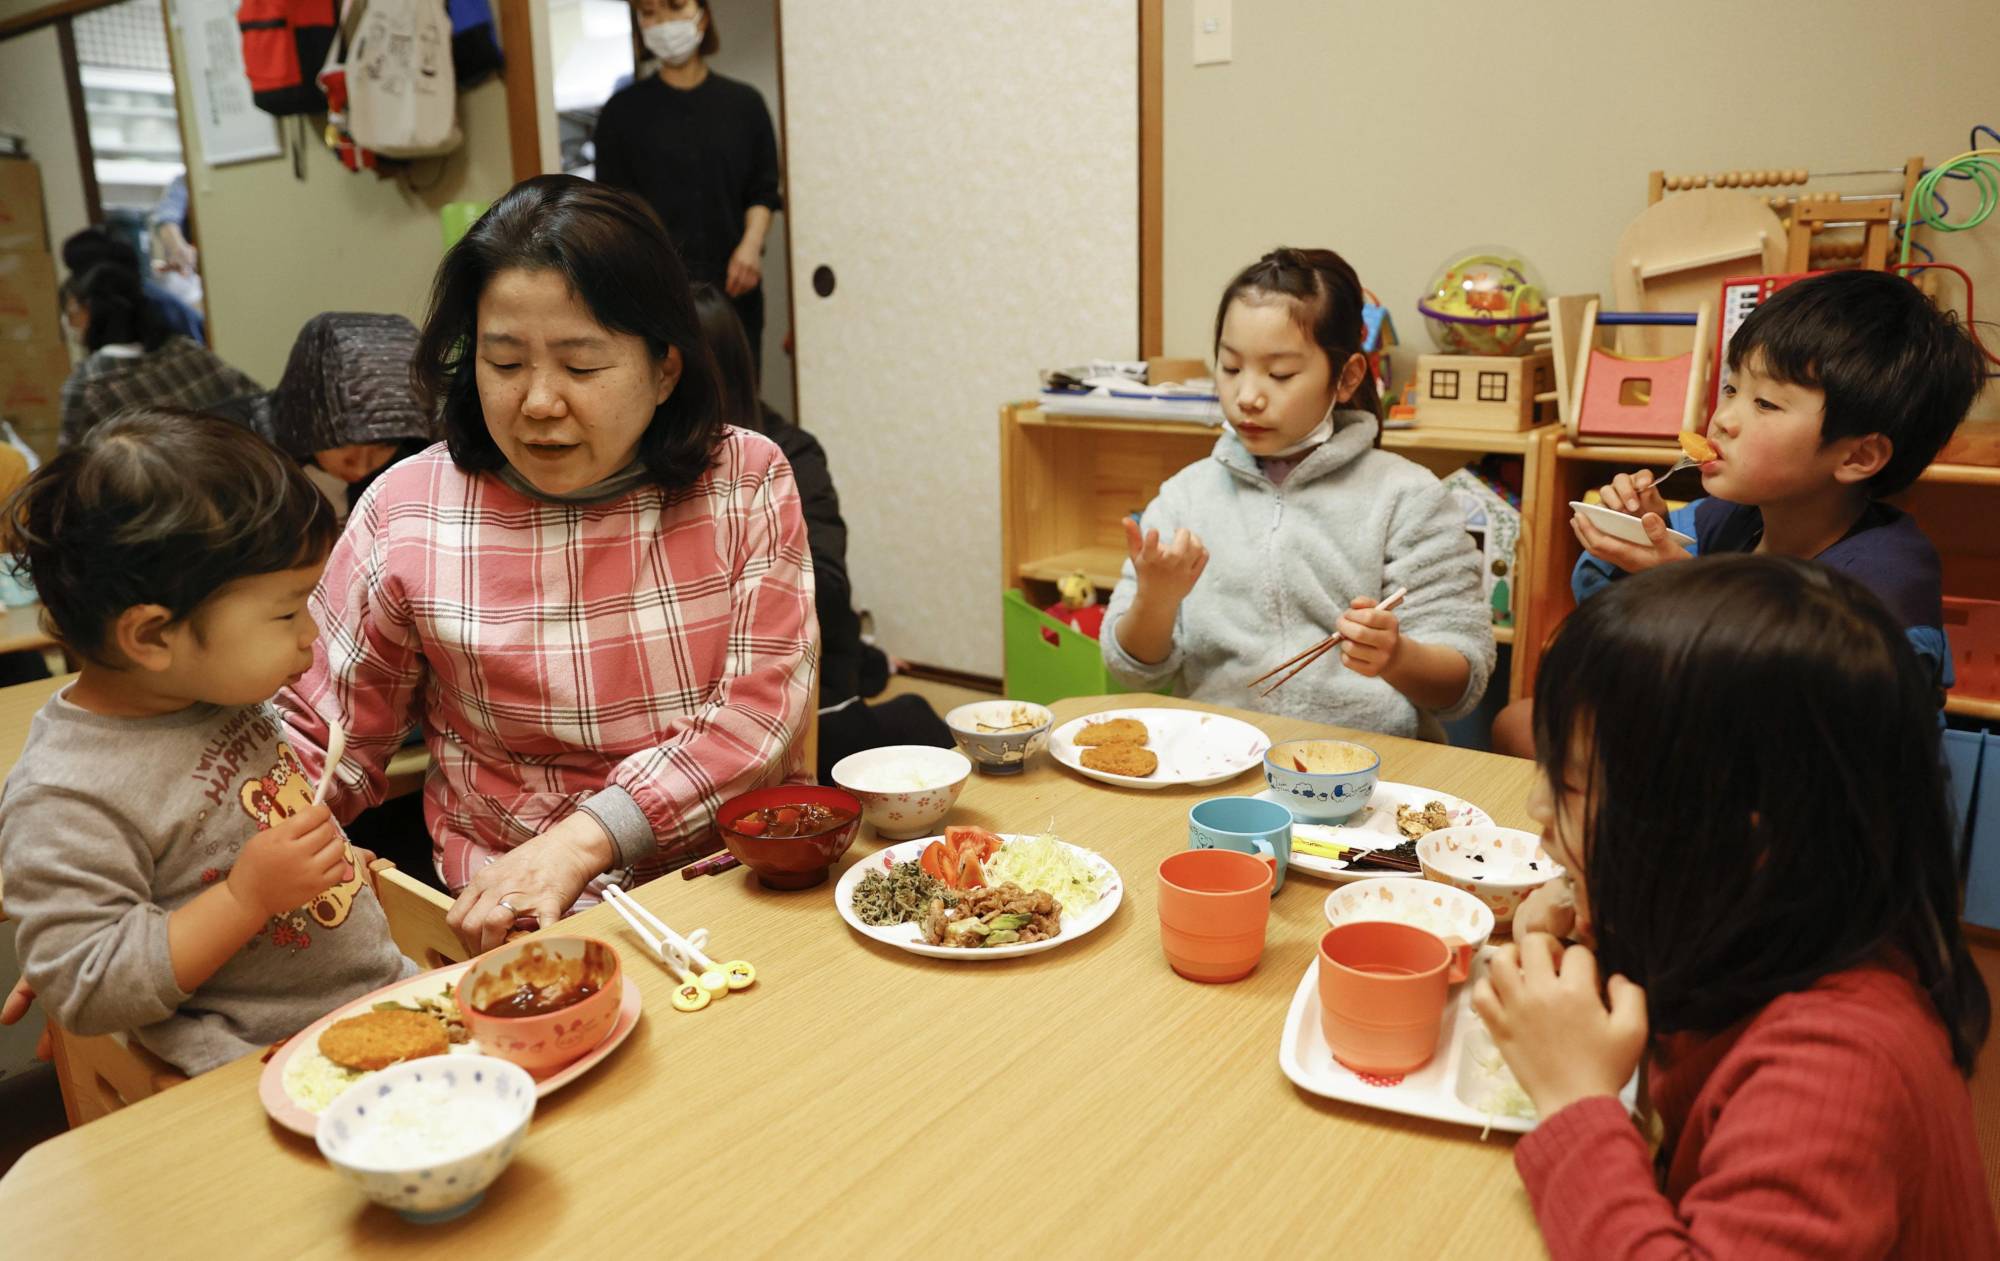 A cafeteria in the city of Osaka that offers free meals to children | KYODO